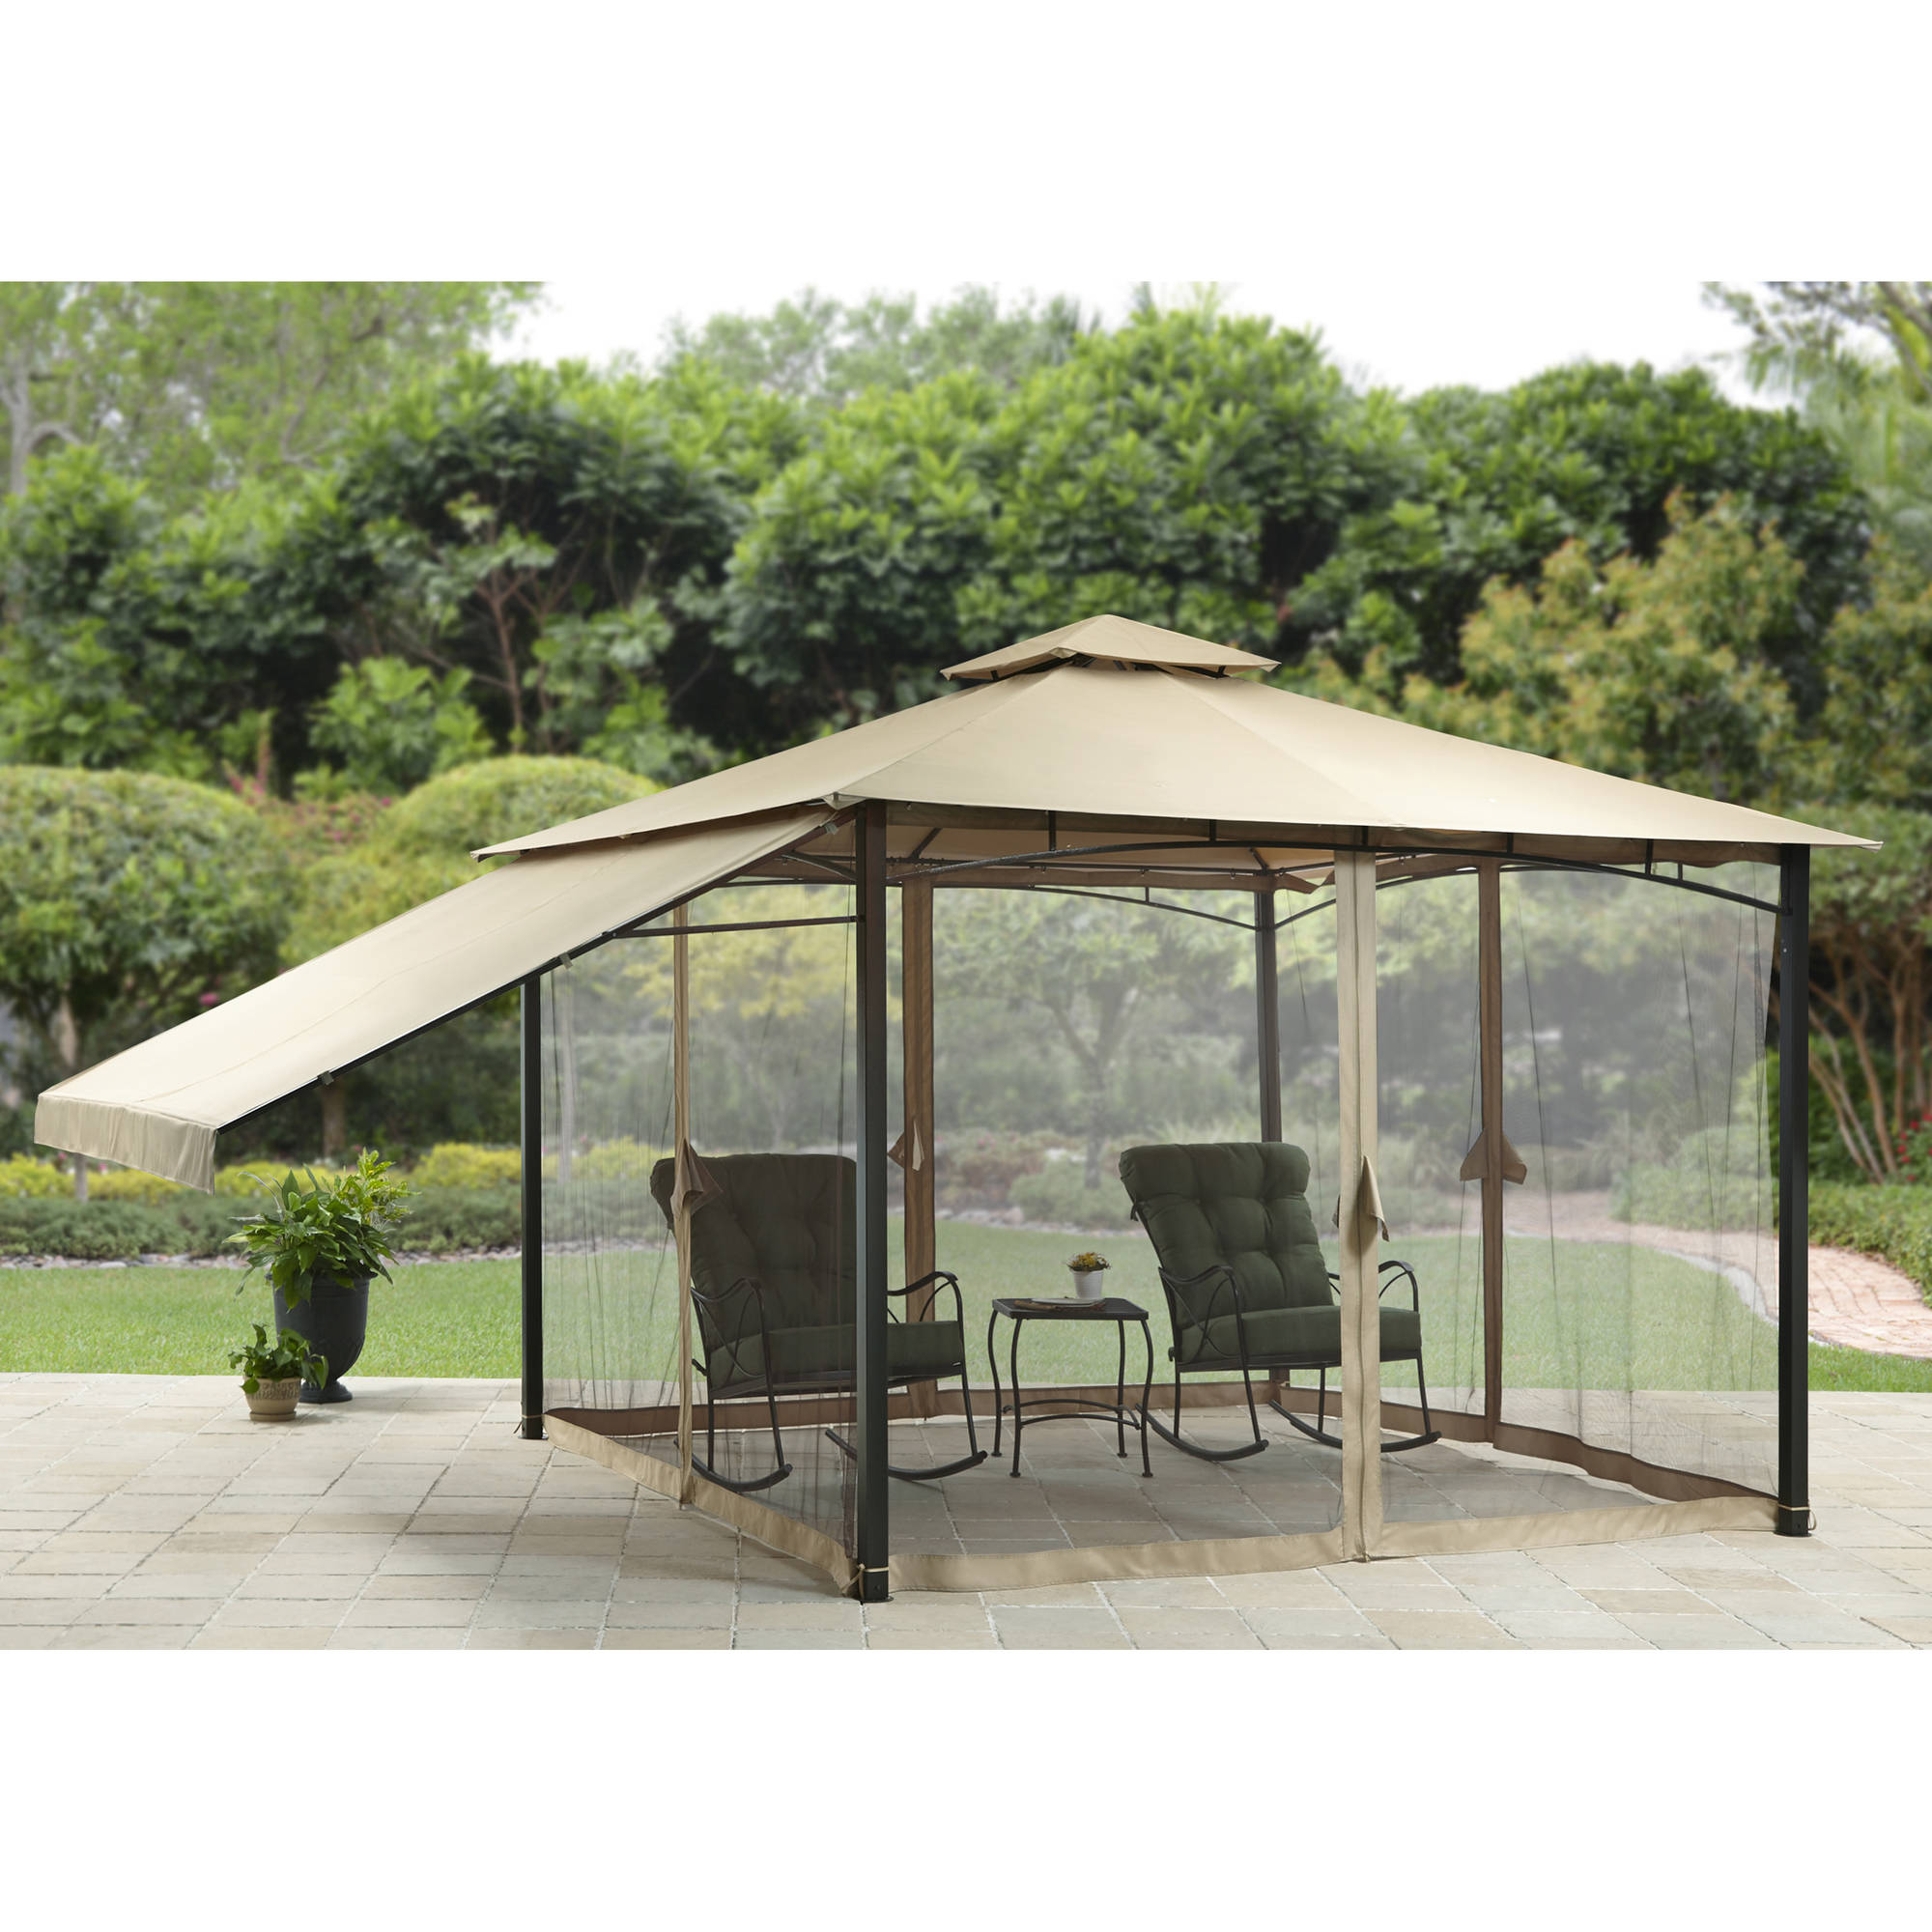 Better Homes & Gardens Canal Drive 11' x 11' Cabin Style Gazebo with Adjustable Side - image 1 of 4